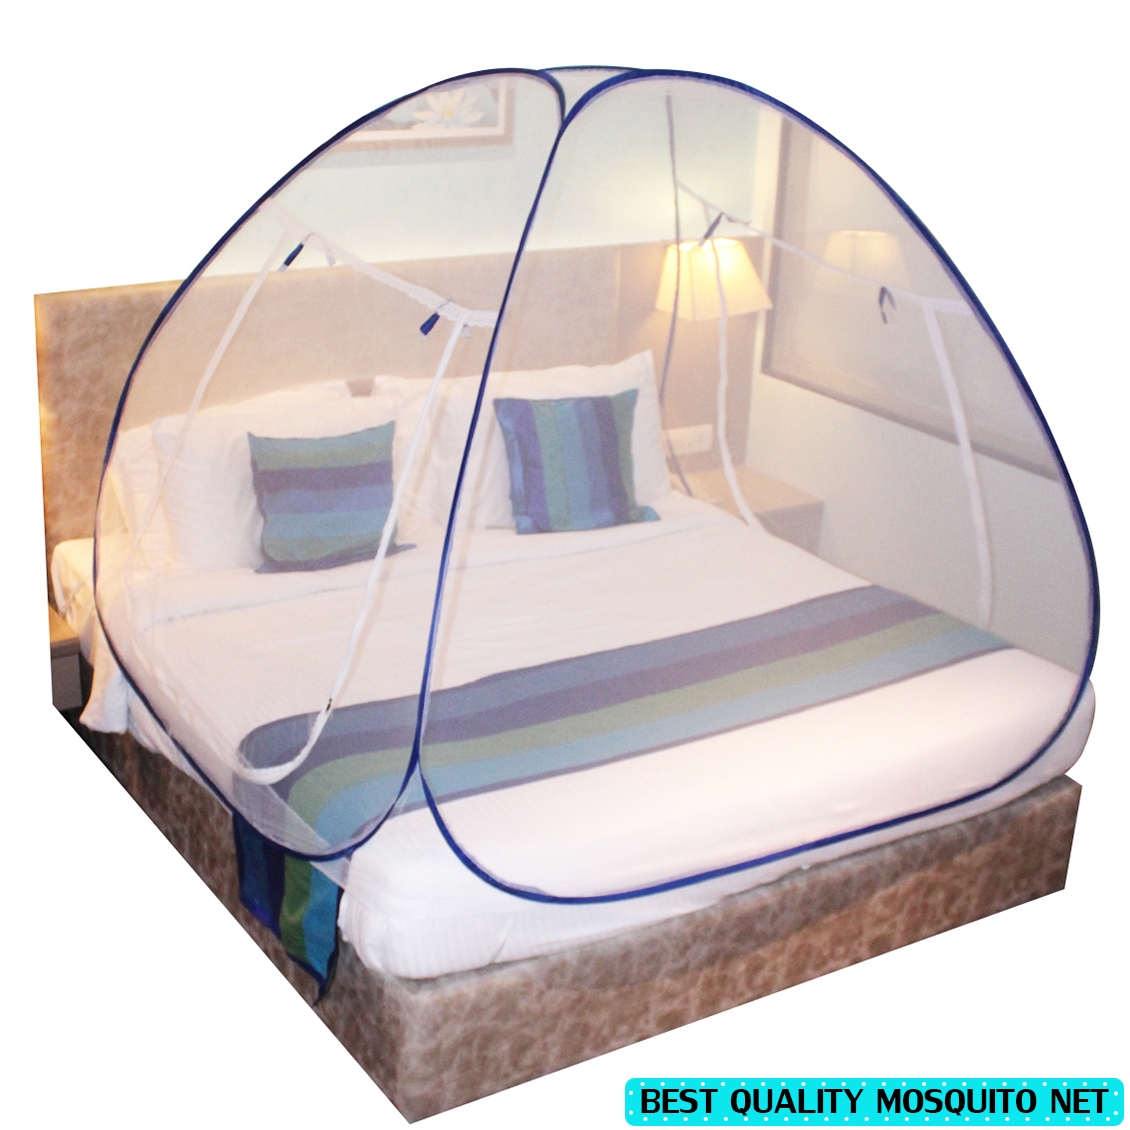  Blue Mosquito Net Foldable Double Bed Net King Size 